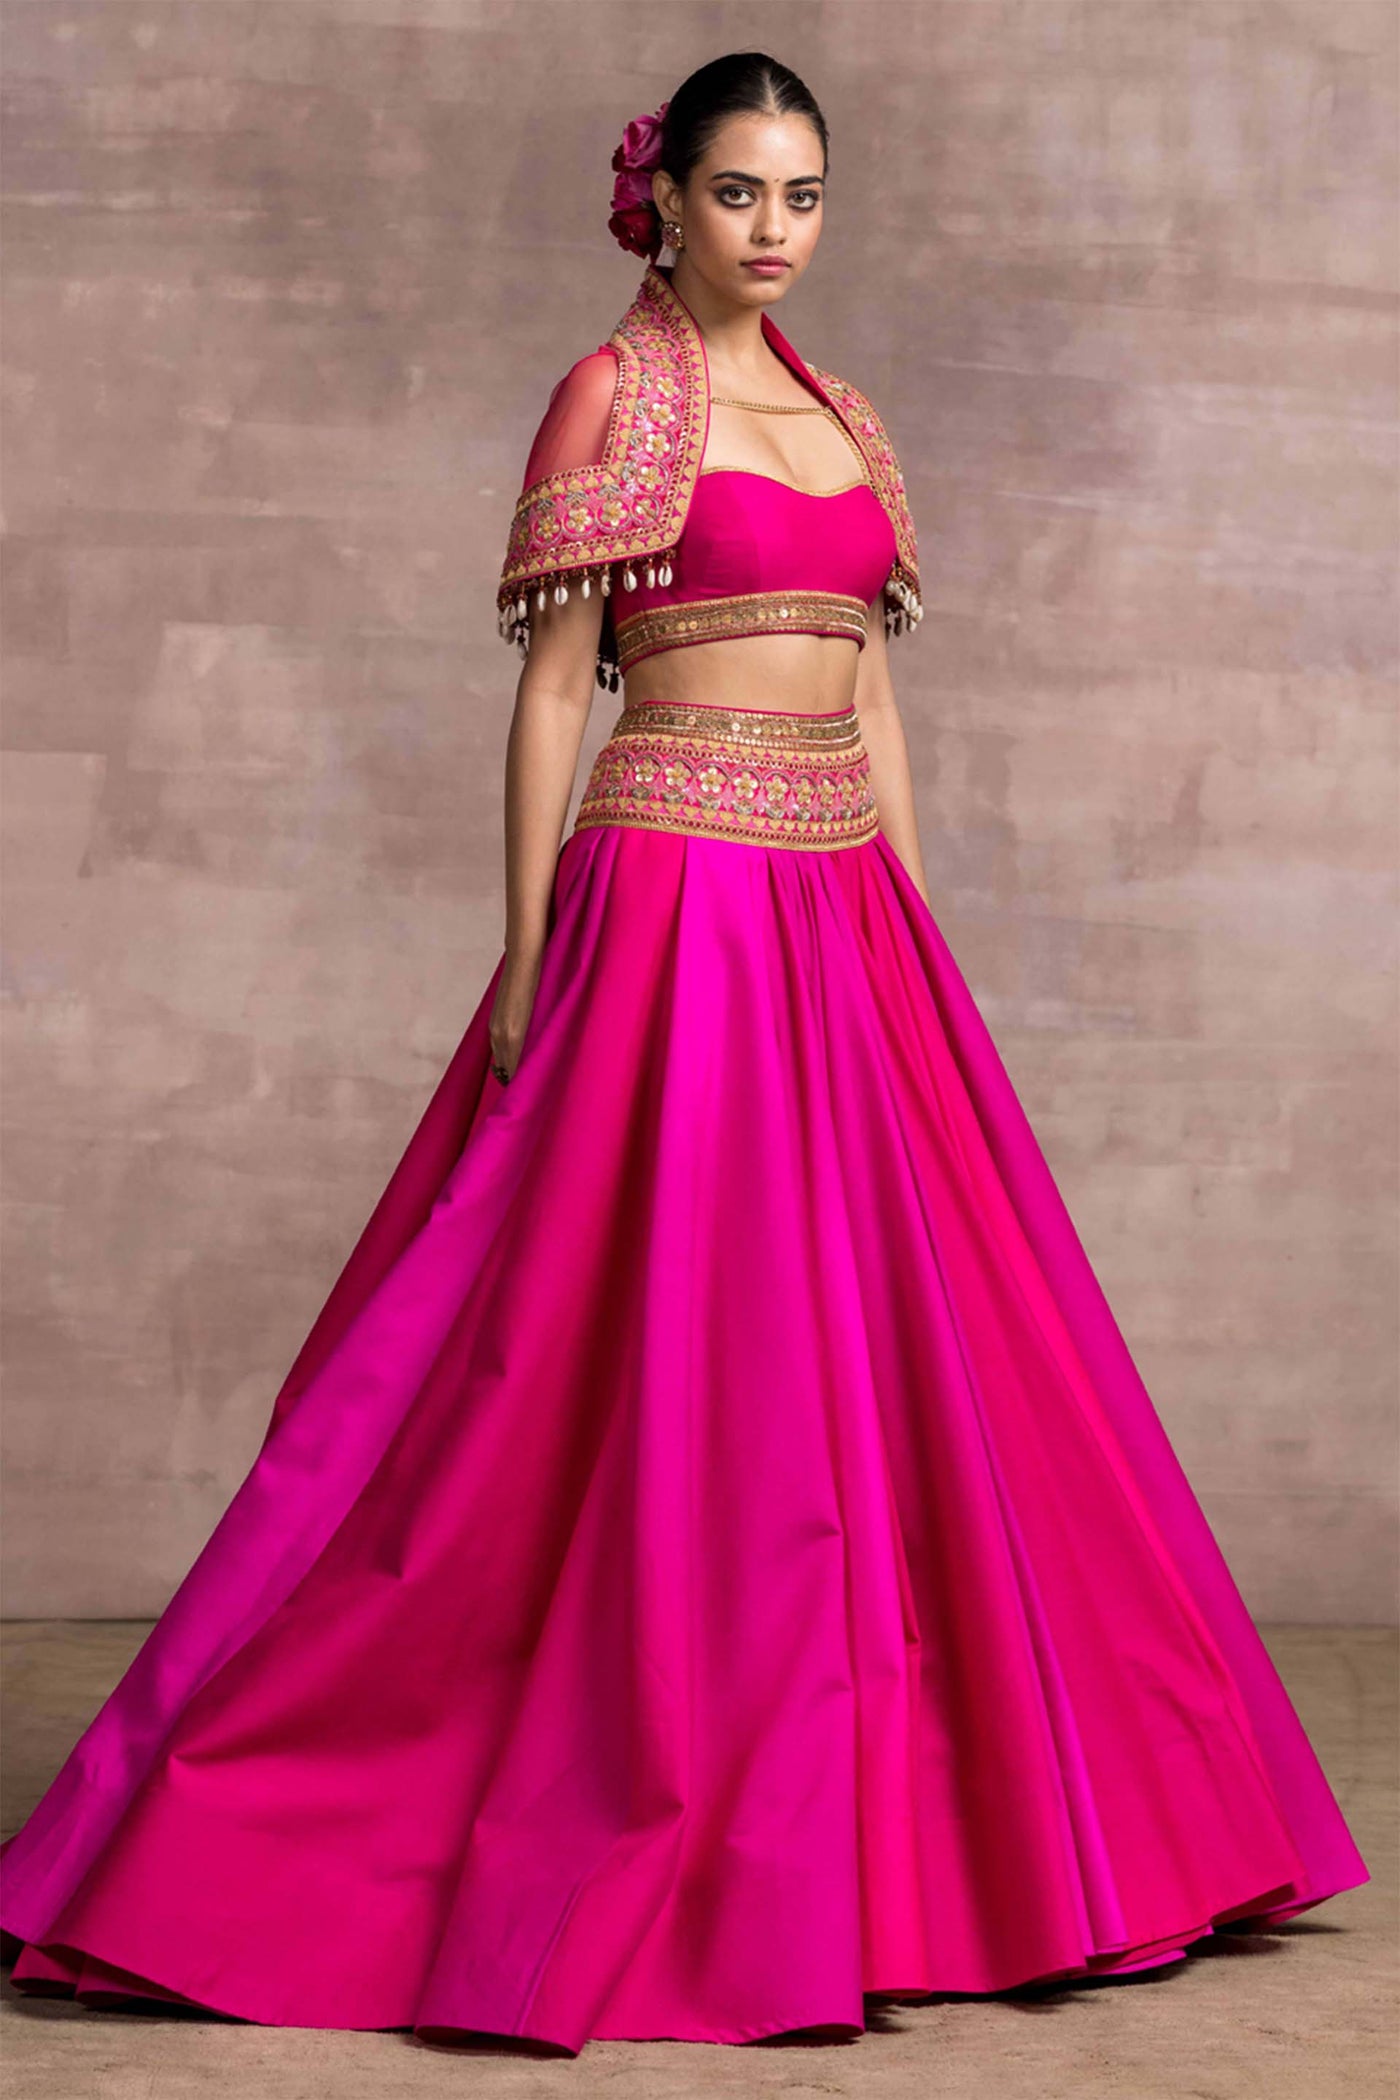 Tarun Tahiliani Tussar Draped Lehenga With Embroidered Hip Yoke And Bustier With Embroidered Sheer Cape fuchsia pink festive indian designer wear online shopping melange singapore